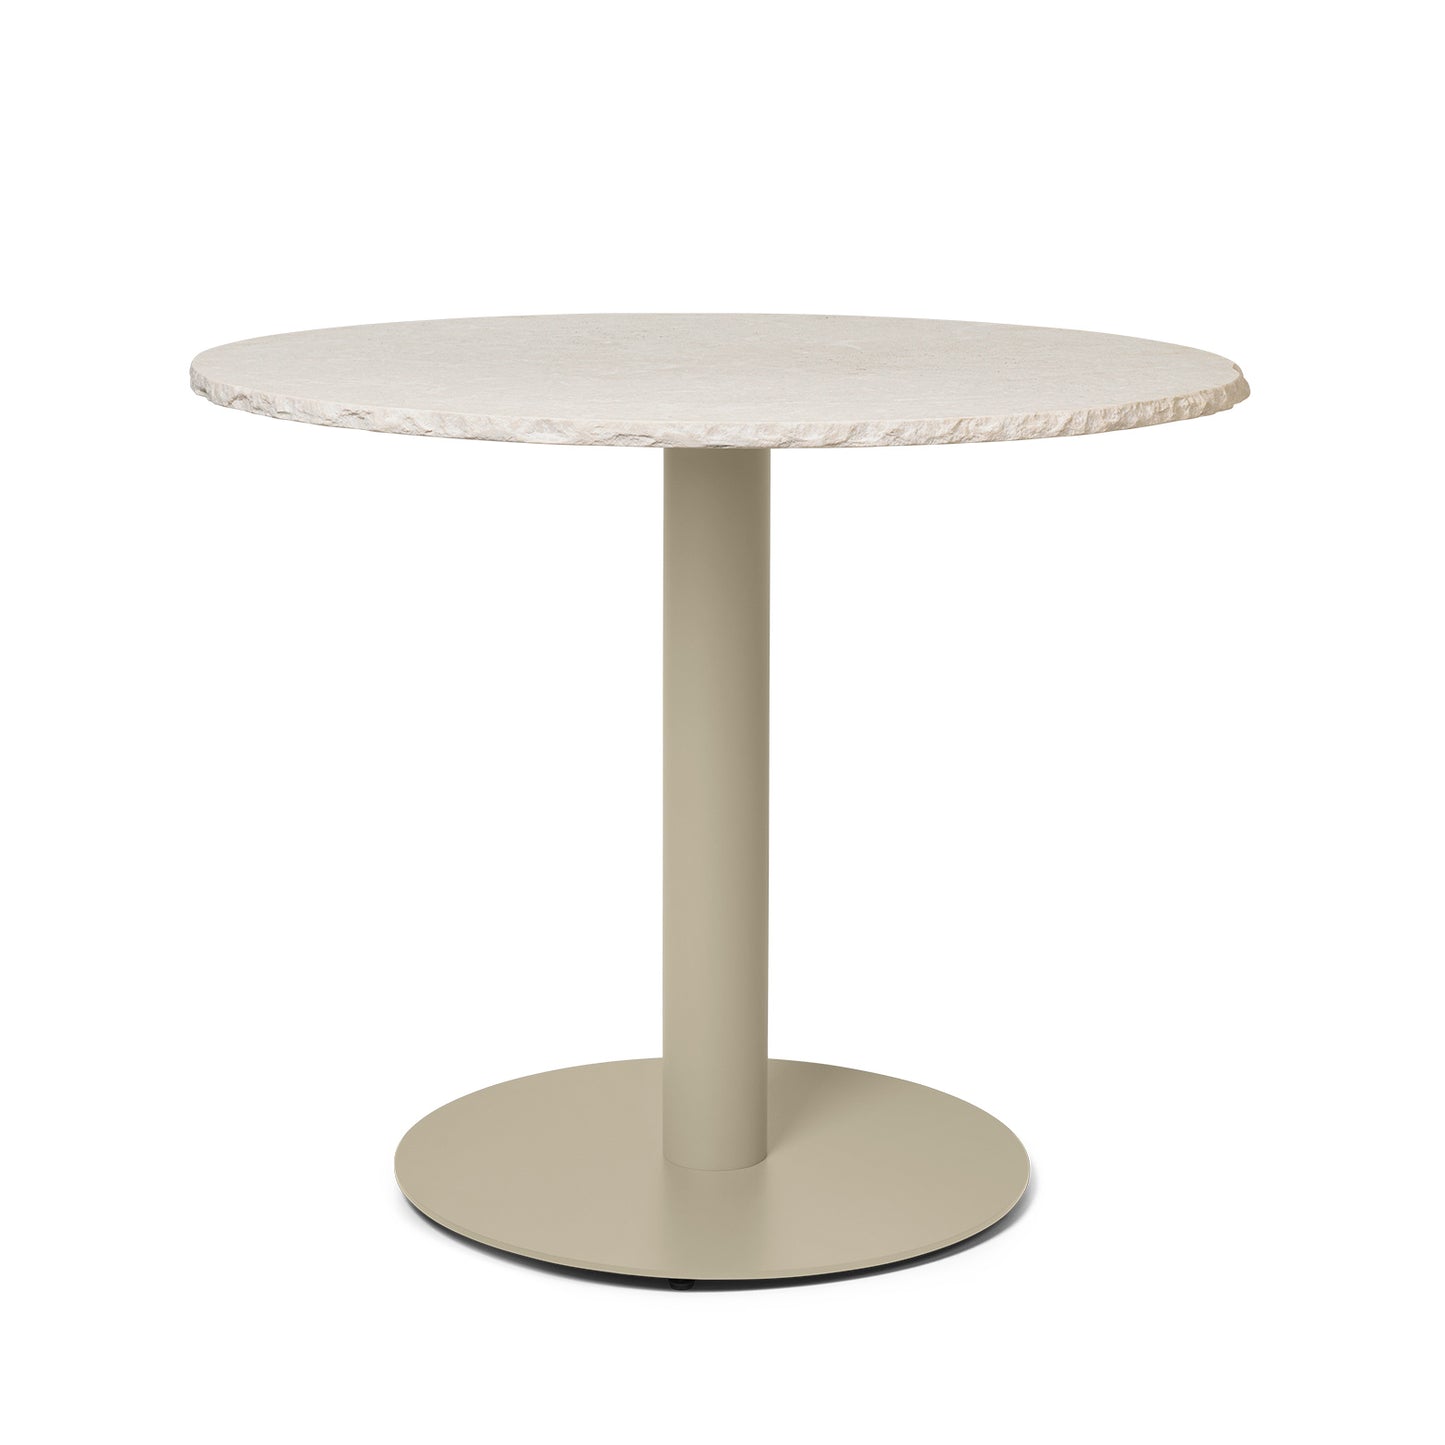 Mineral Dining Table - Bianco Curia/Cashmere